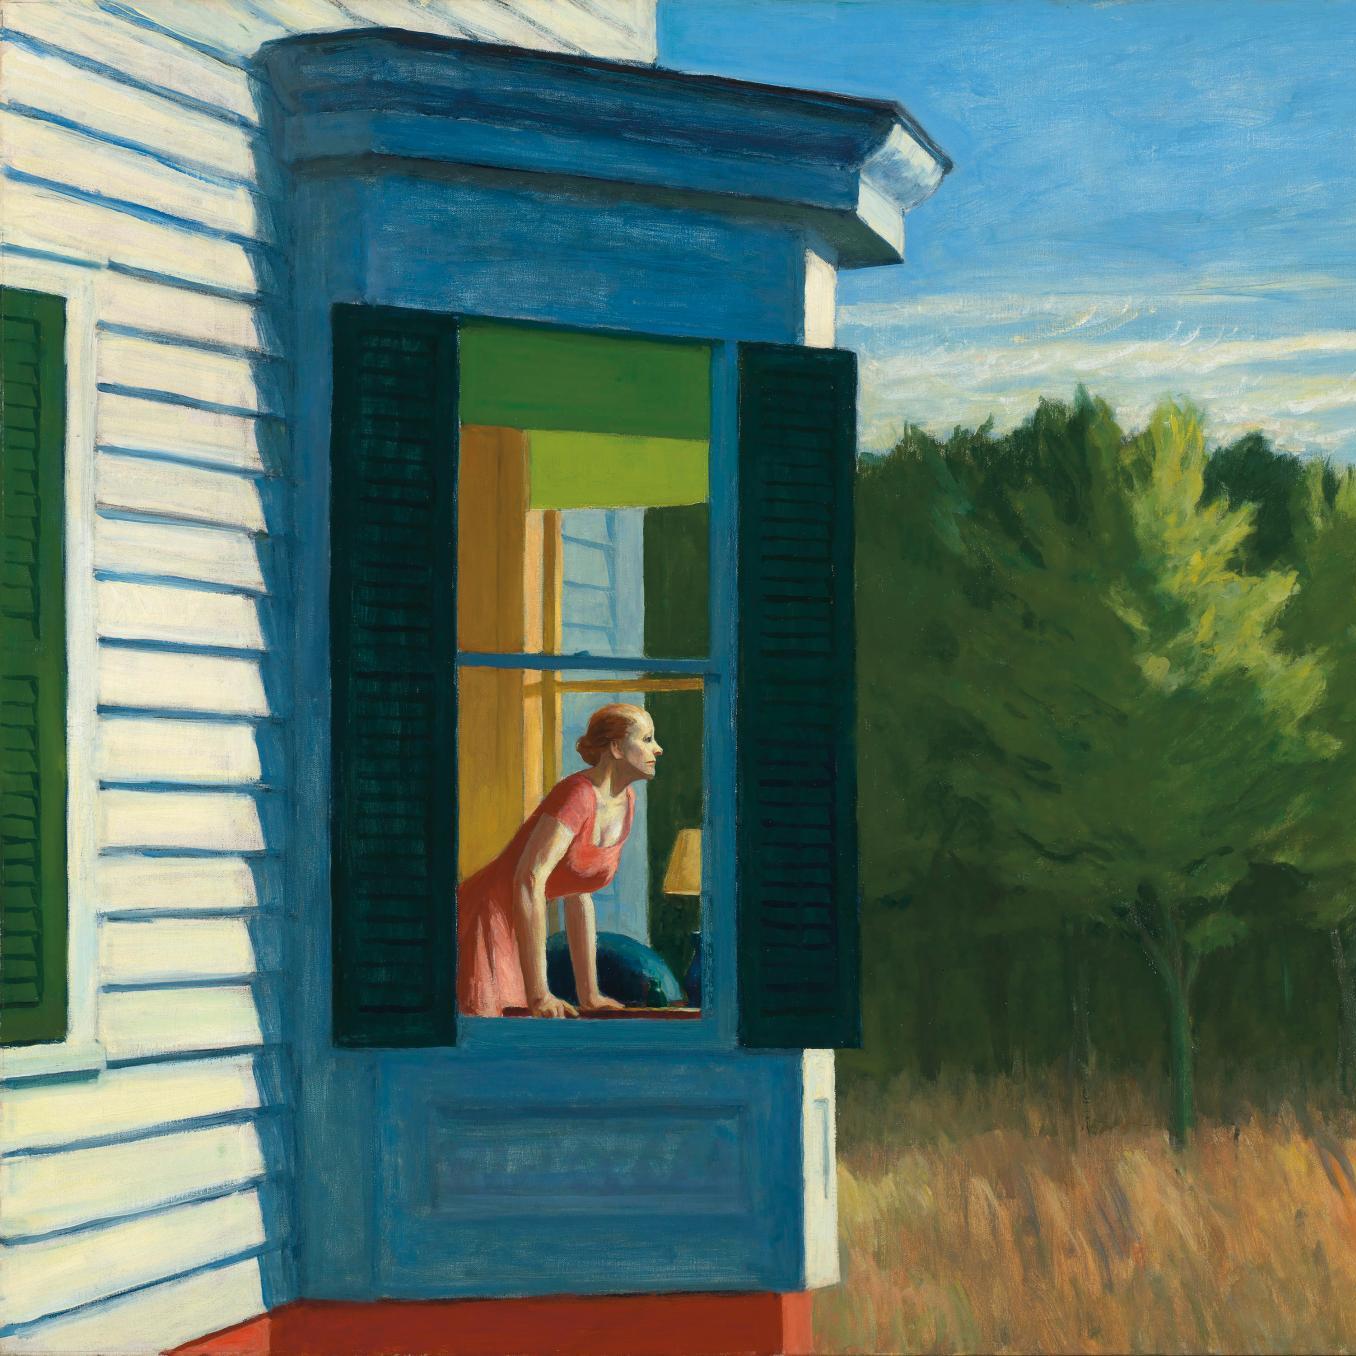 Hopper’s Mystery Replayed in Basel